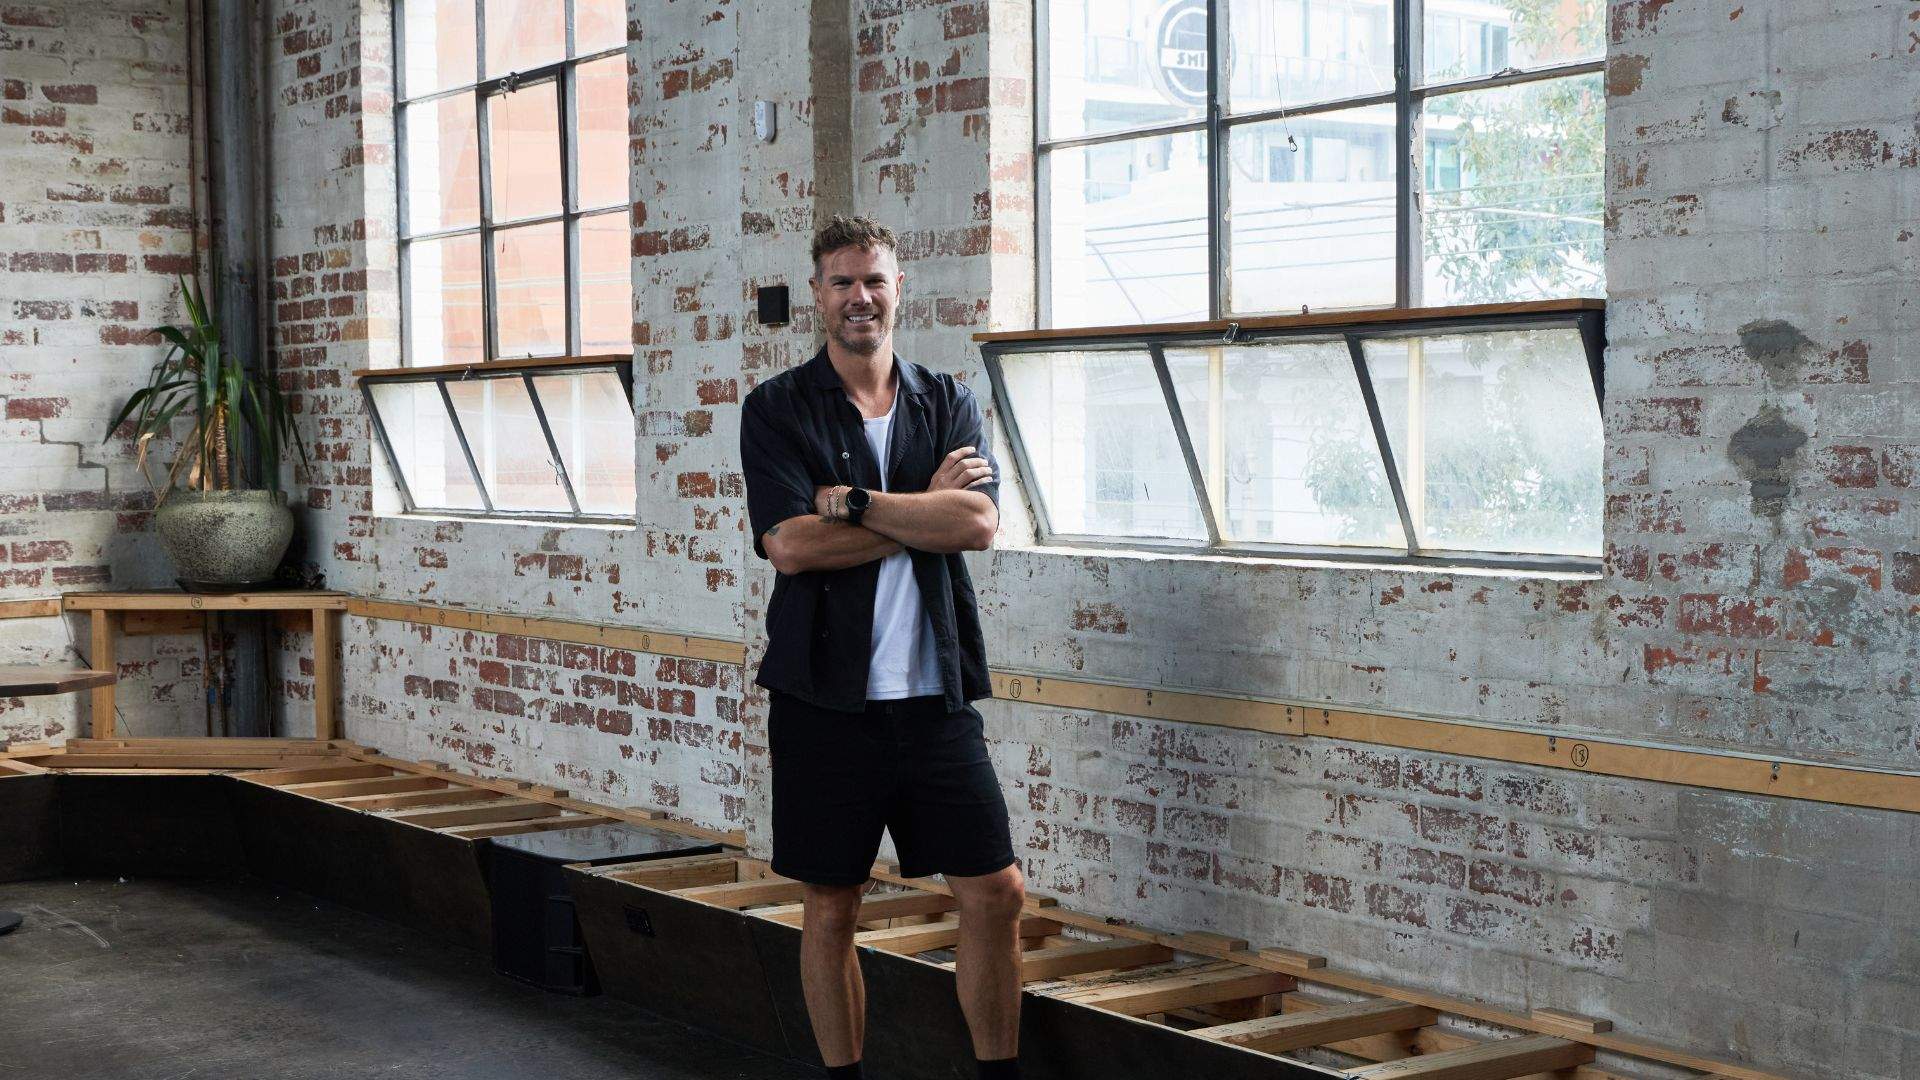 Neptune's Nic Coulter Is Opening an Ever-Evolving Bar and Music Venue in the Former Galah Digs